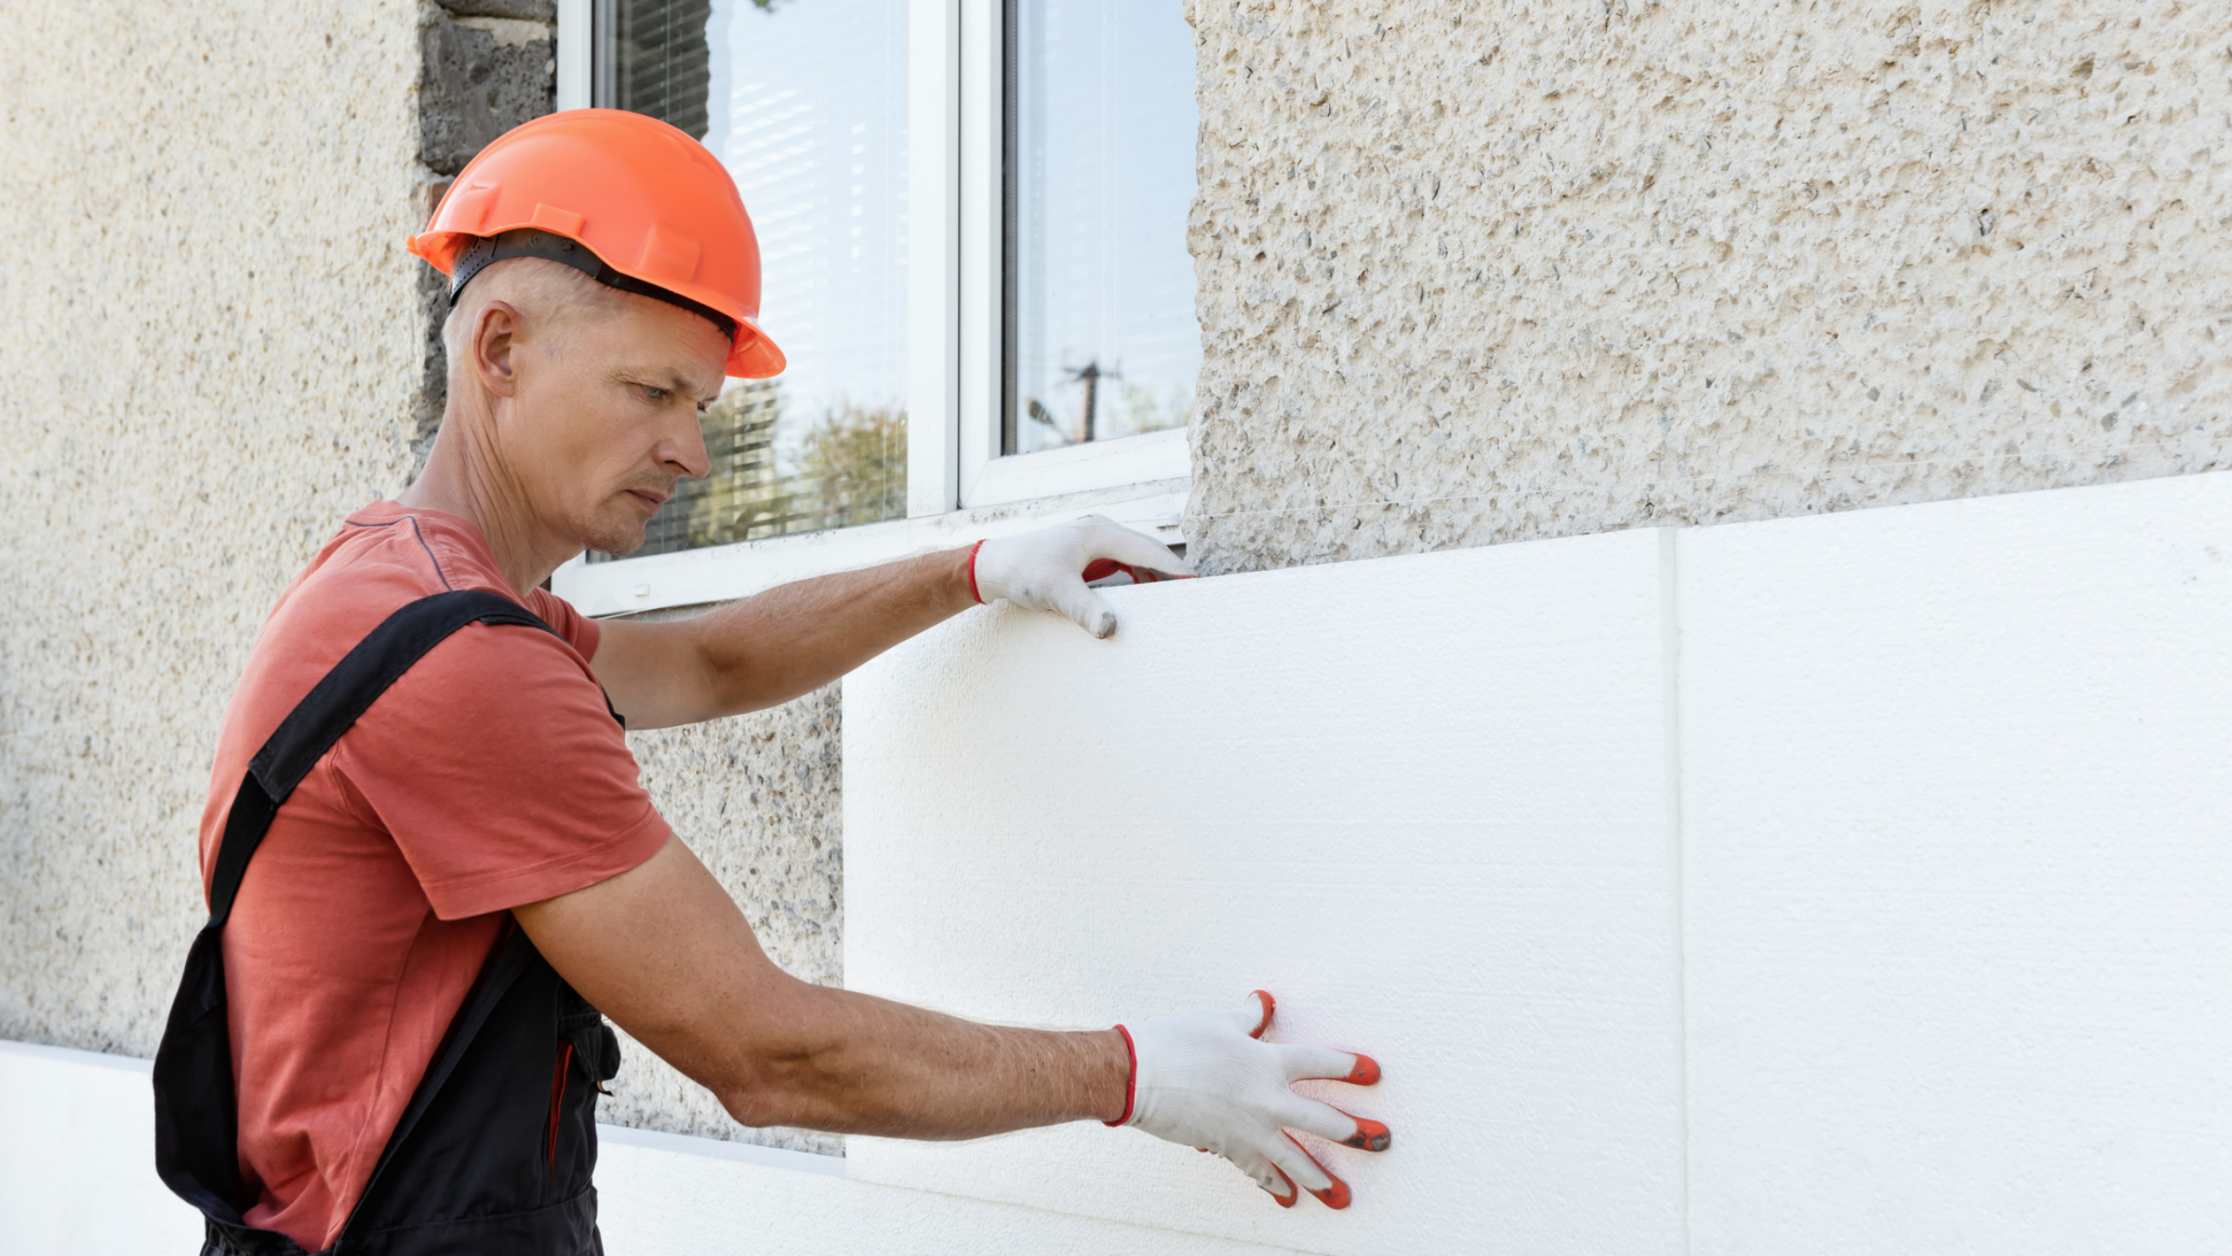 How to find a cladding installer